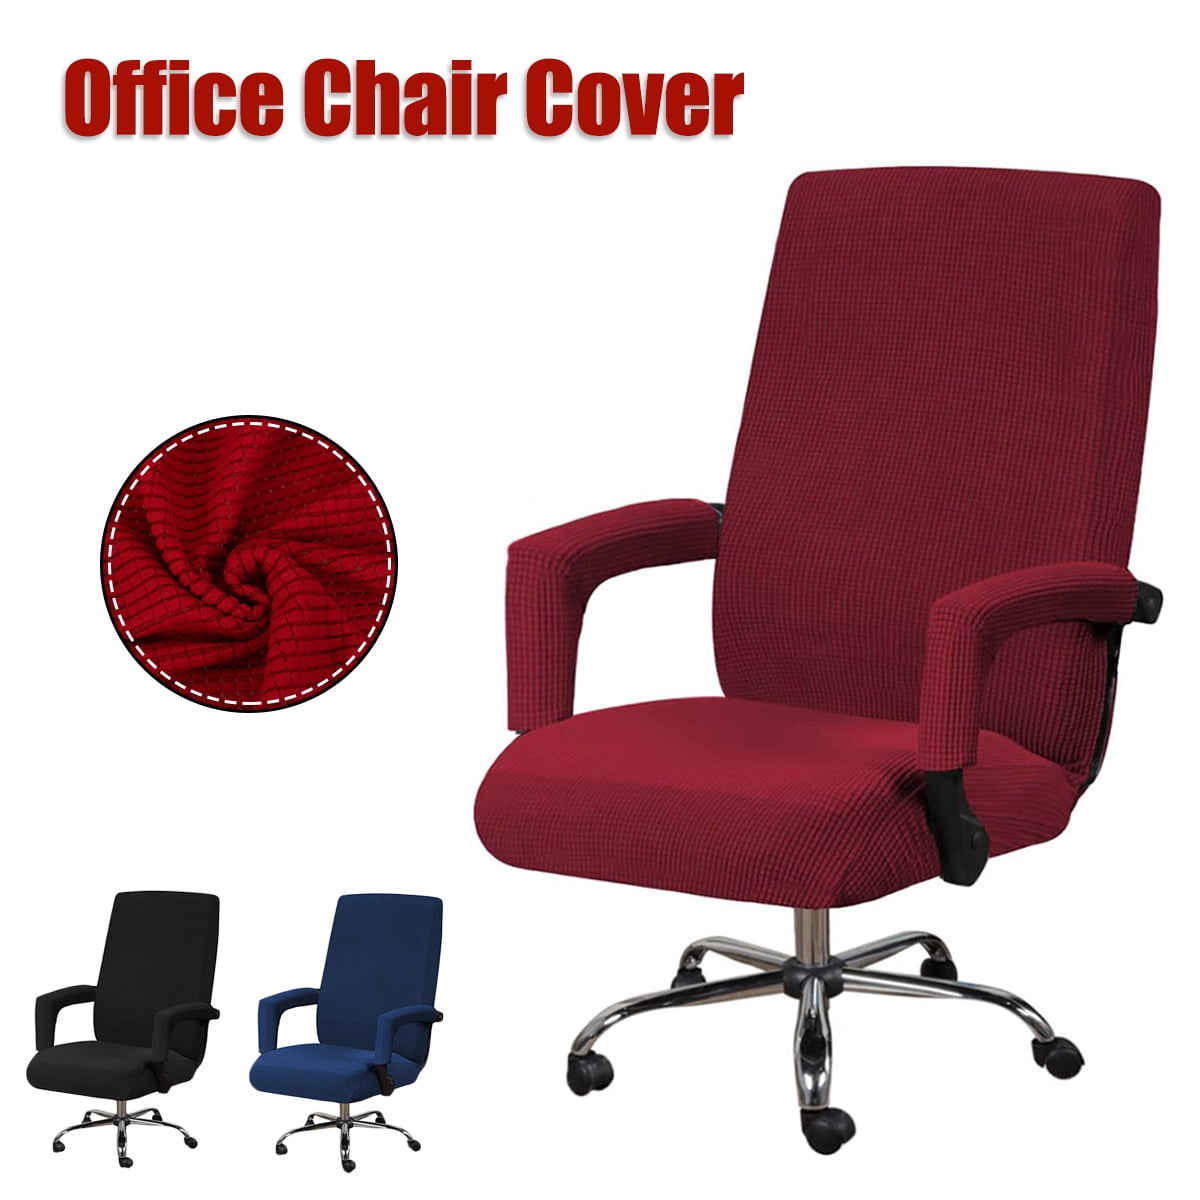 Details about   Stretchy Back Office Chair Covers For Computer Chair/Desk Chair Home Office 